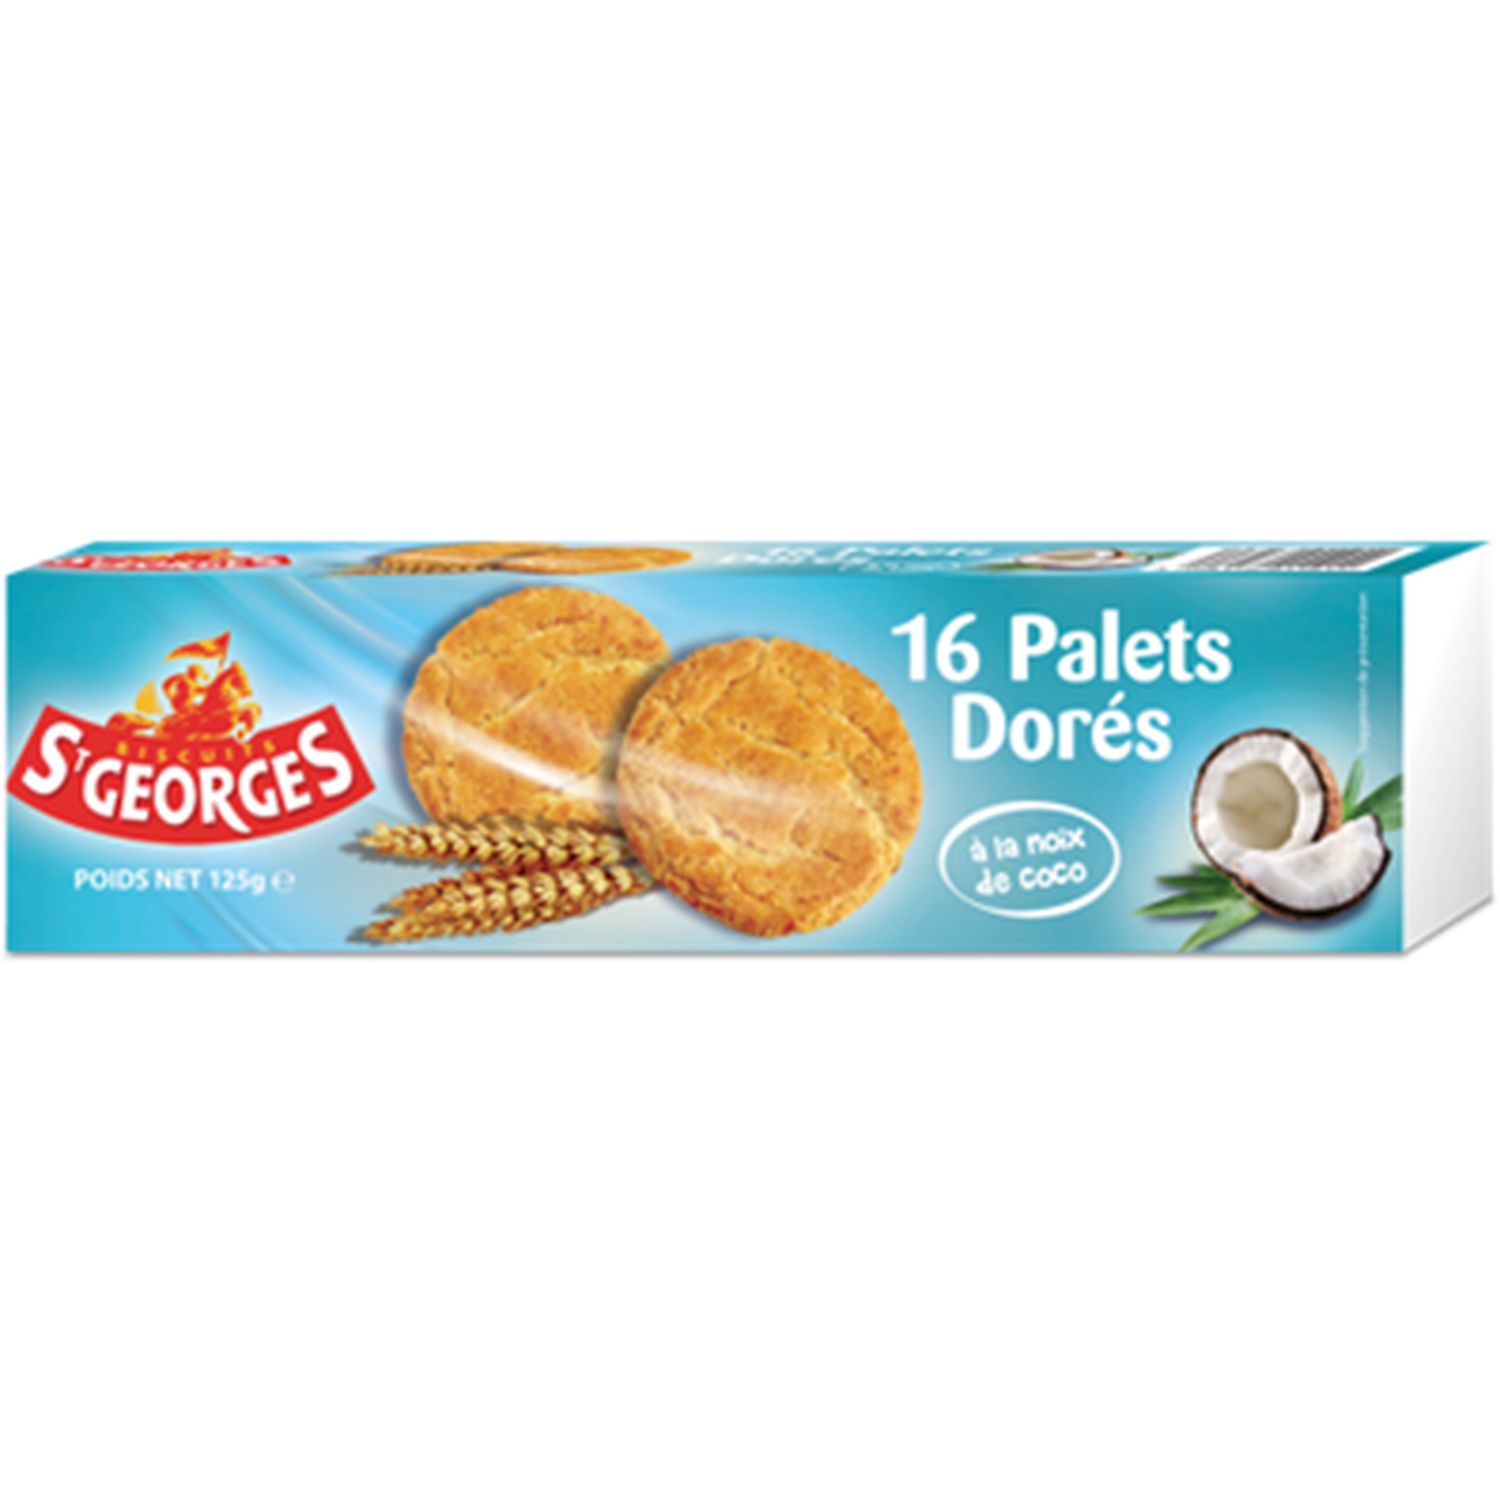 Mon Gouter, St Georges (x 25 biscuits)